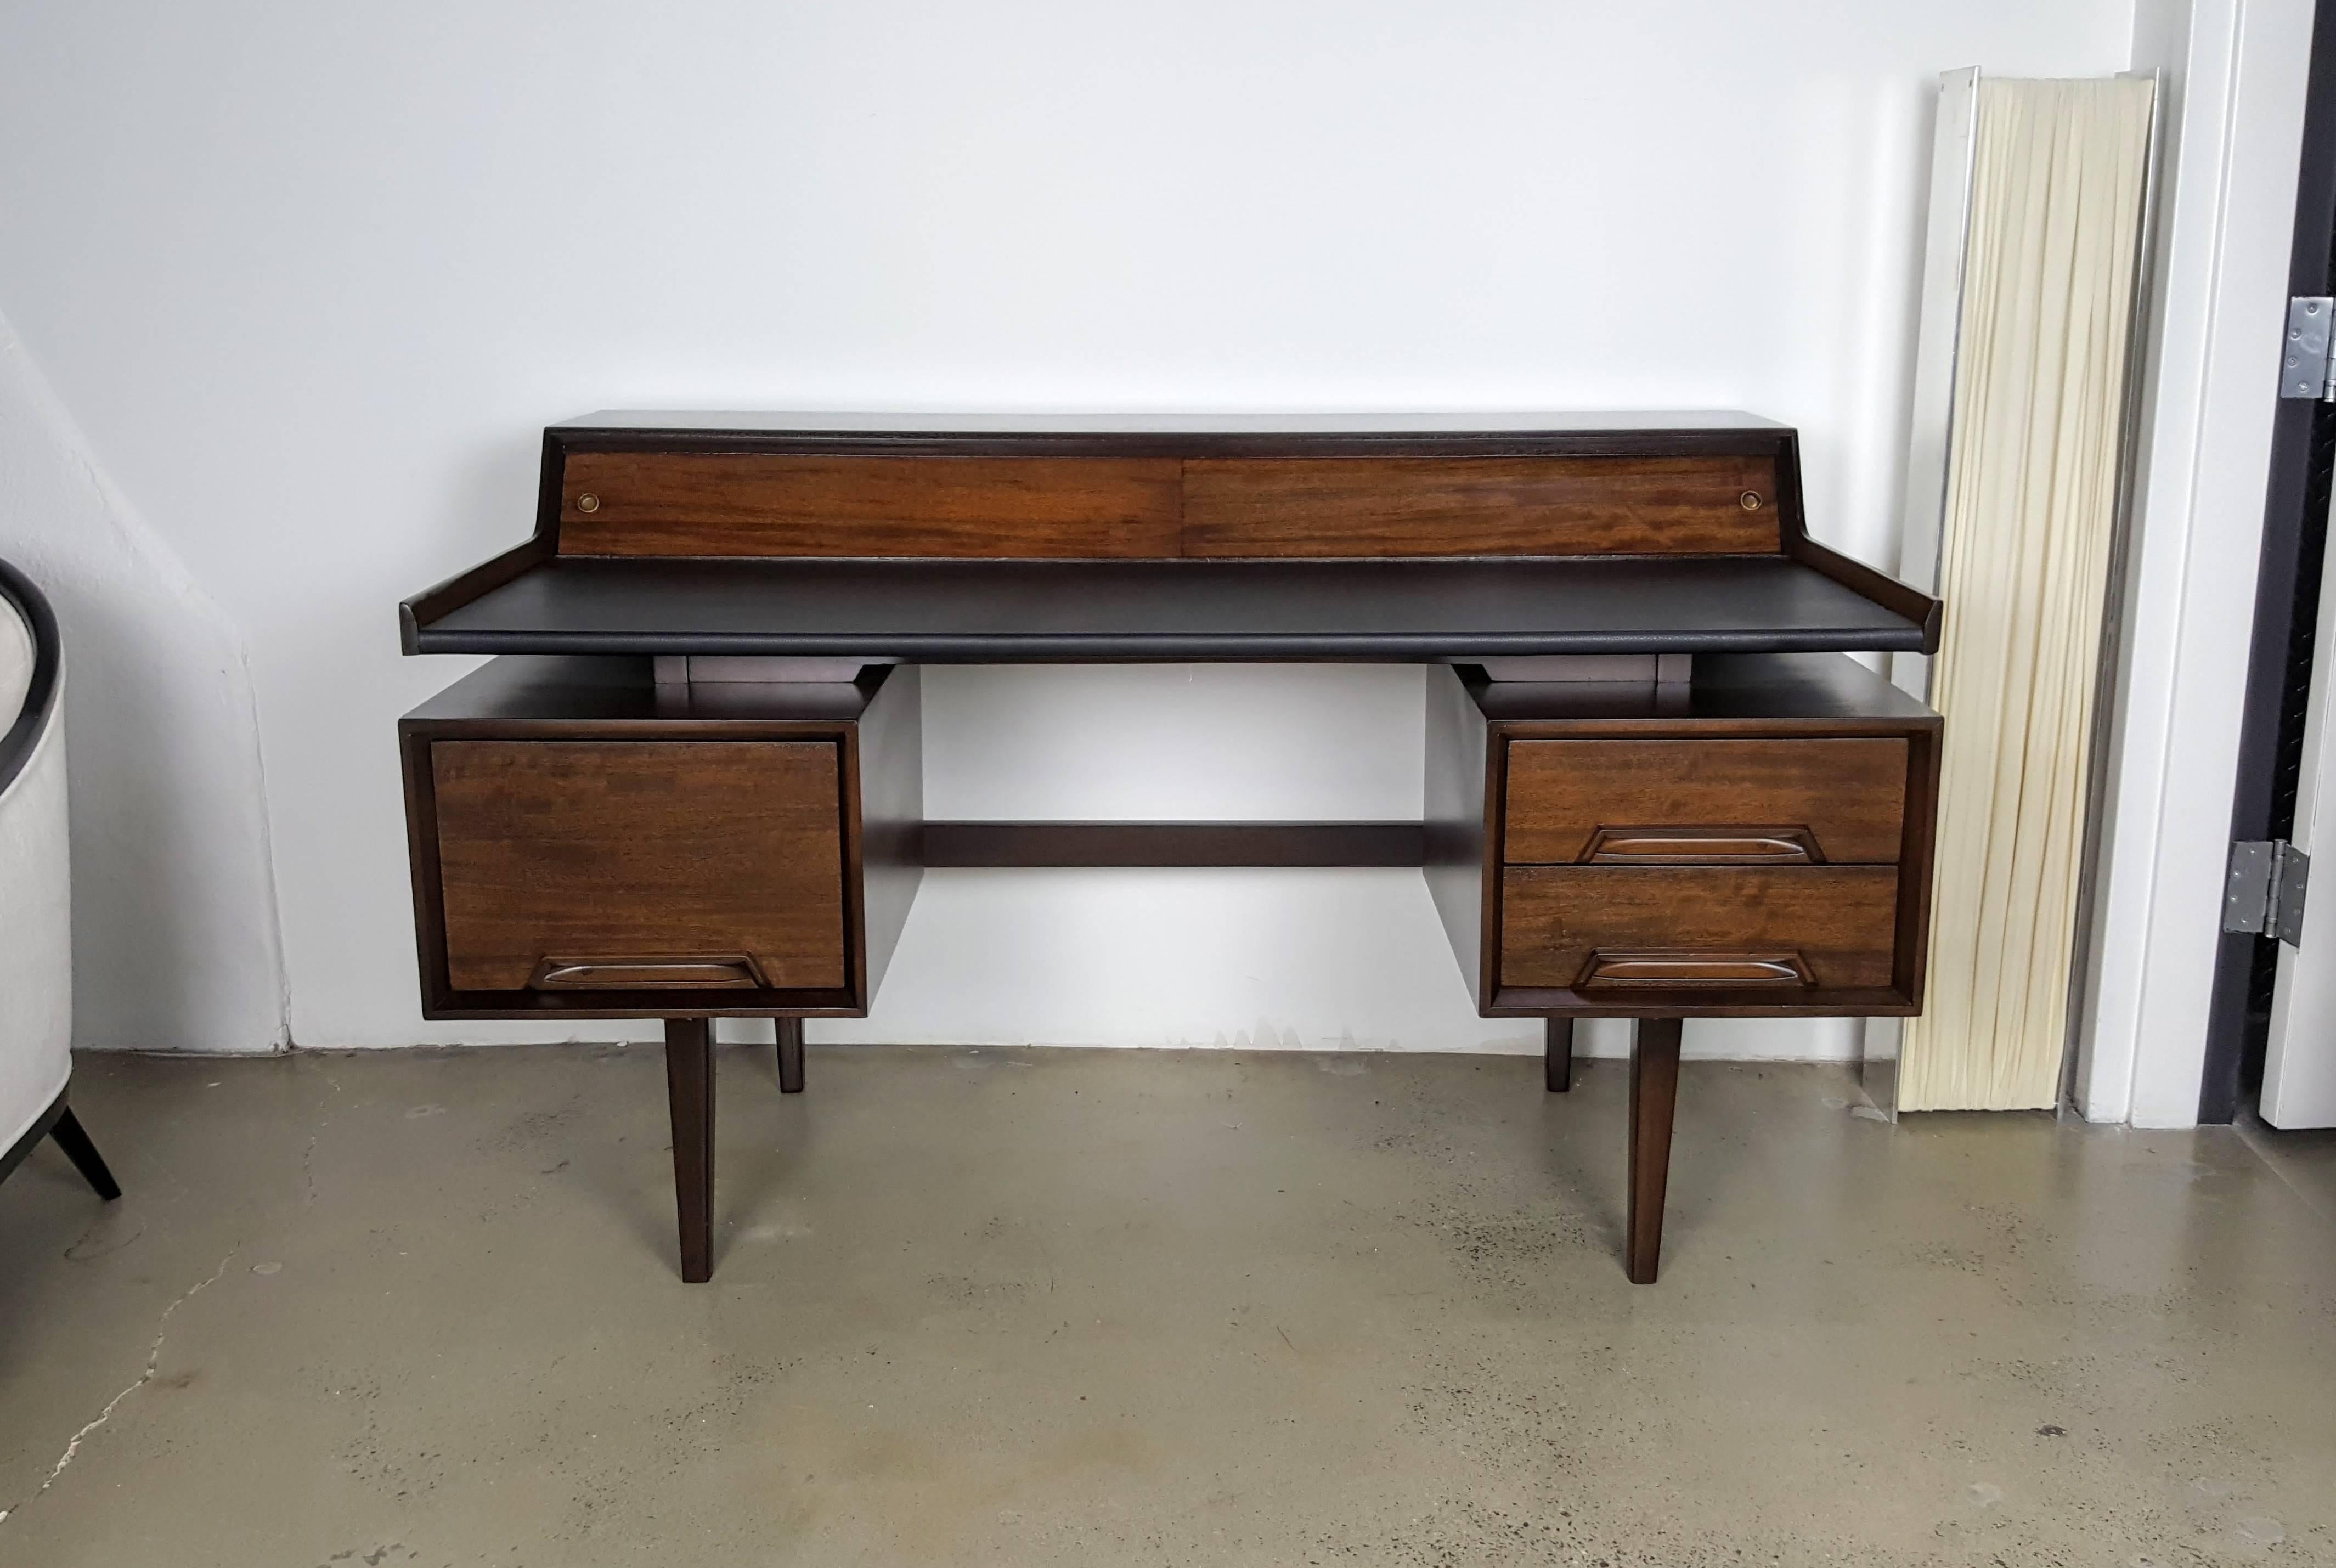 Architectural mahogany writing desk by Milo Baughman, 1960s. Beautiful design with great storage. Newly refinished with leather top.

See this item in our private NYC showroom! Refine Limited is located in the heart of Chelsea at the history